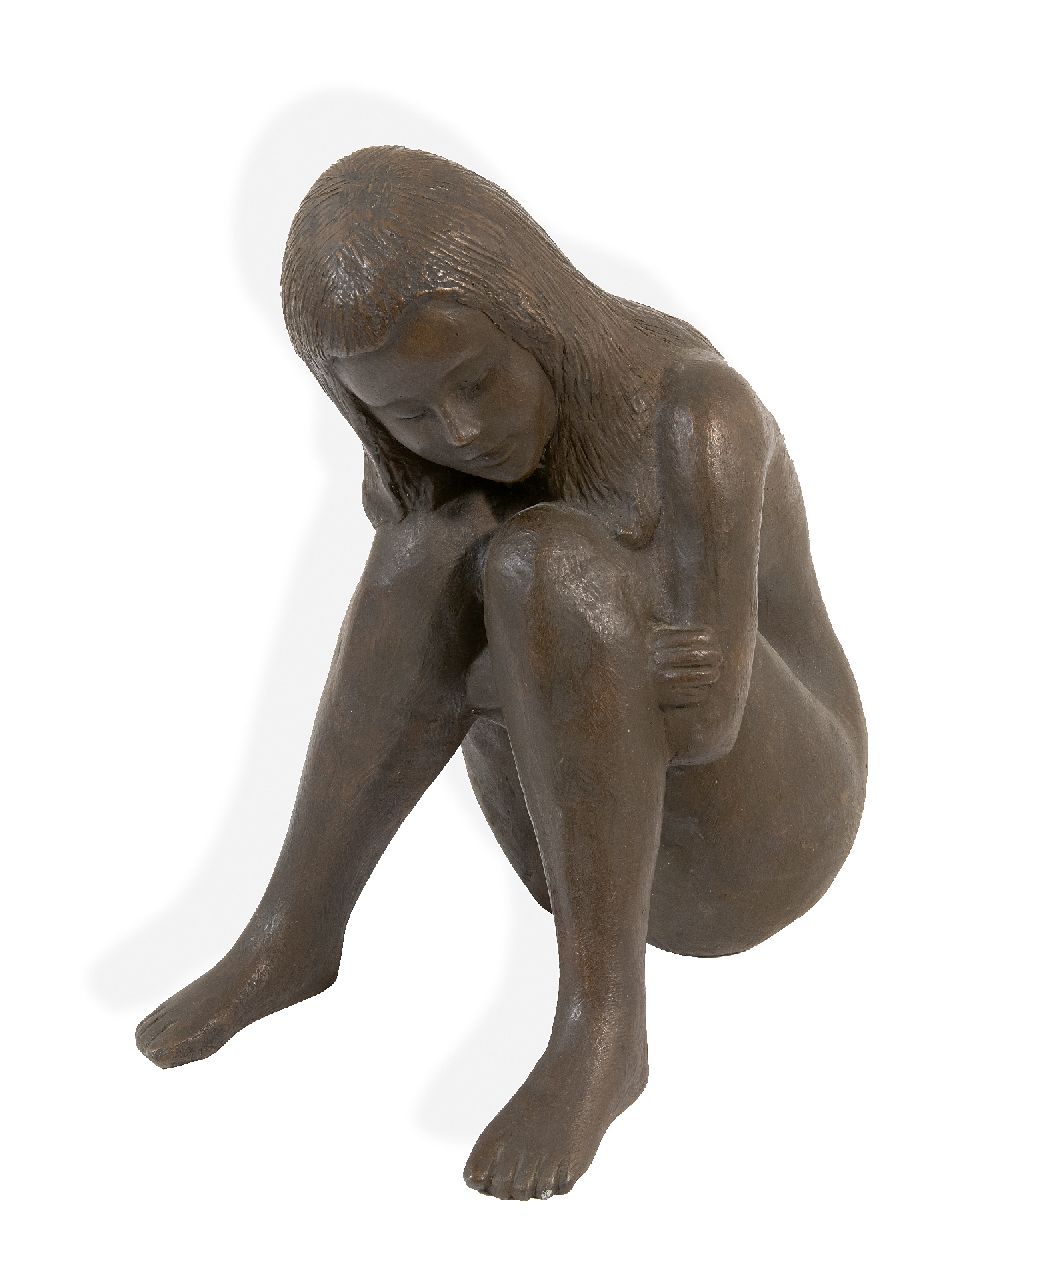 Moser K.  | Kurt Moser | Sculptures and objects offered for sale | Melangolia, bronze 31.7 x 14.0 cm, signed with monogram along lower edge